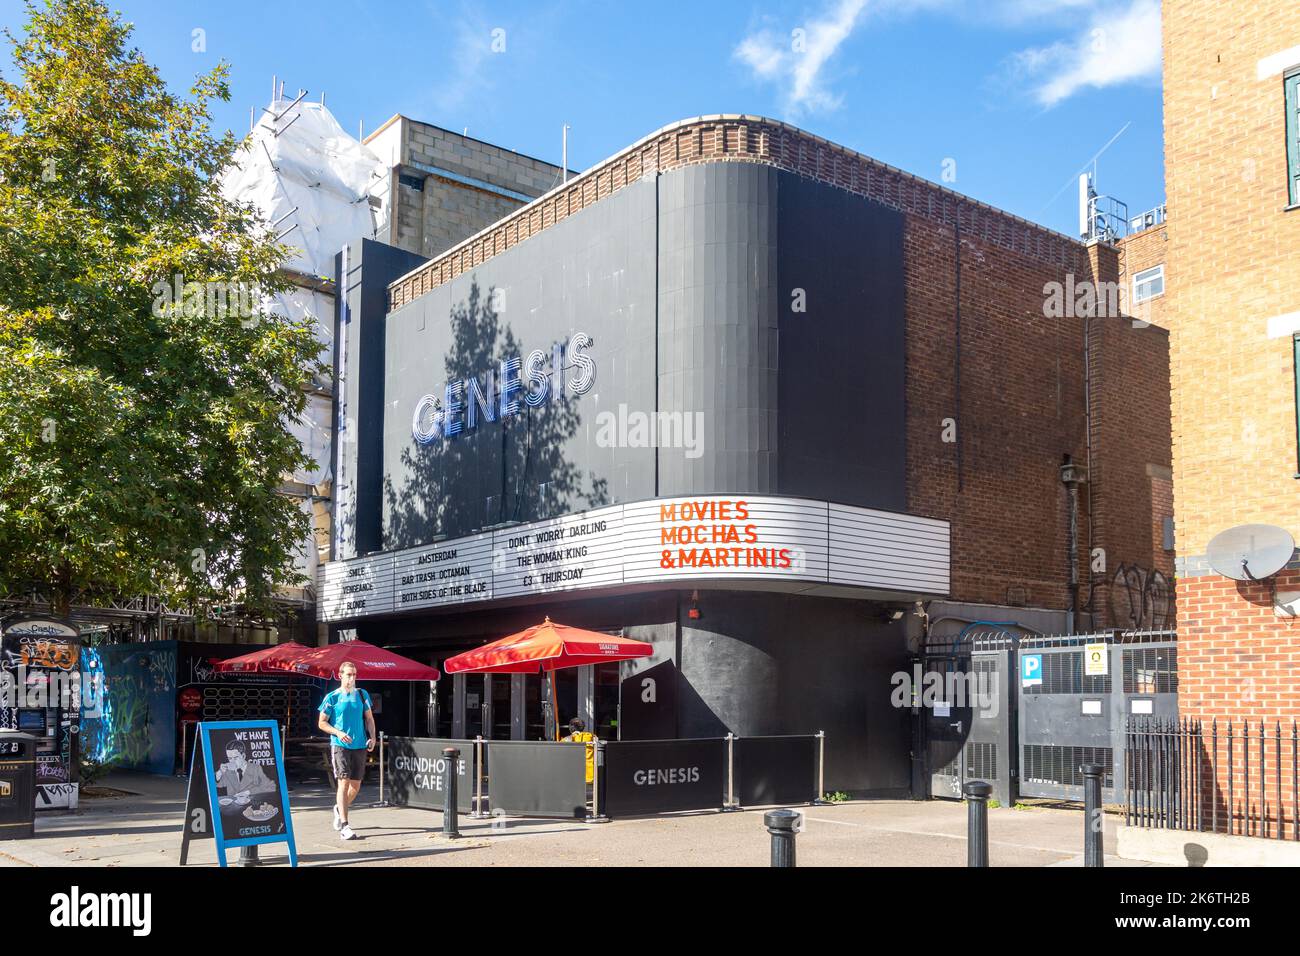 Genesis Cinema, Mile End Road, Bethnal Green, London Borough of Tower Hamlets, Greater London, Inghilterra, Regno Unito Foto Stock